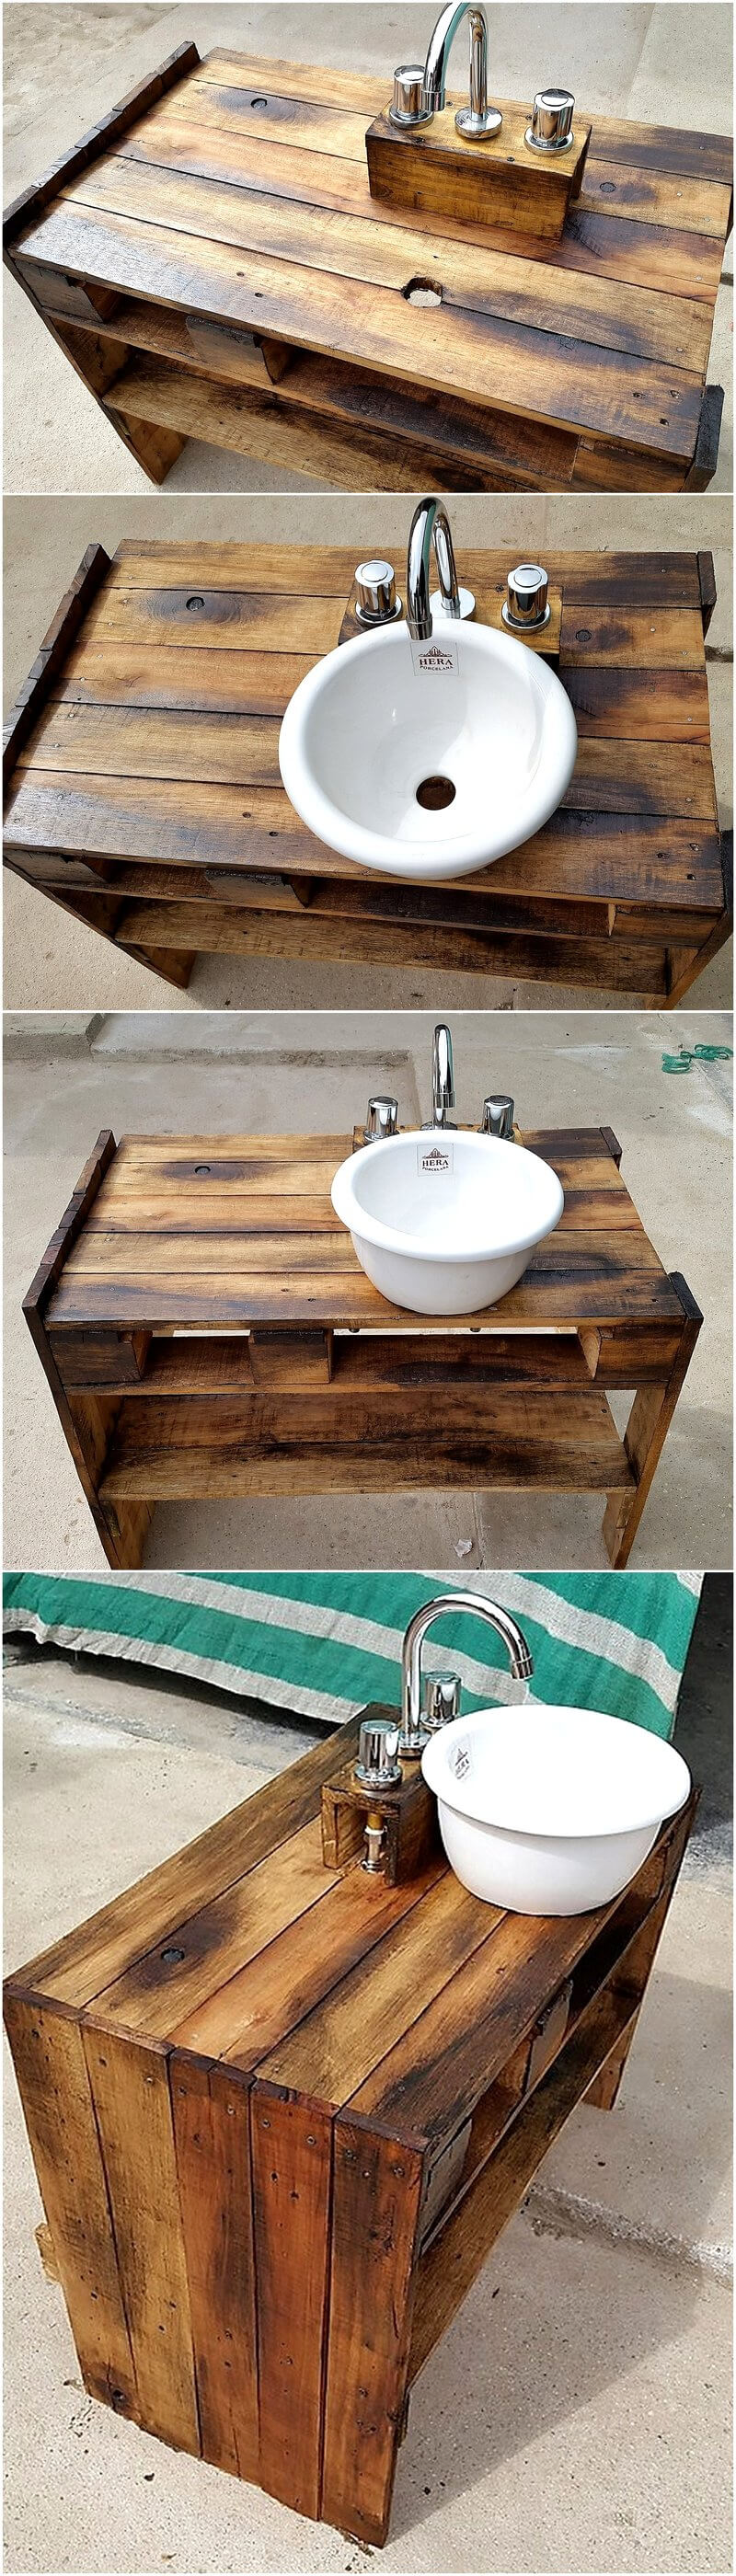 recycled pallets wooden sink